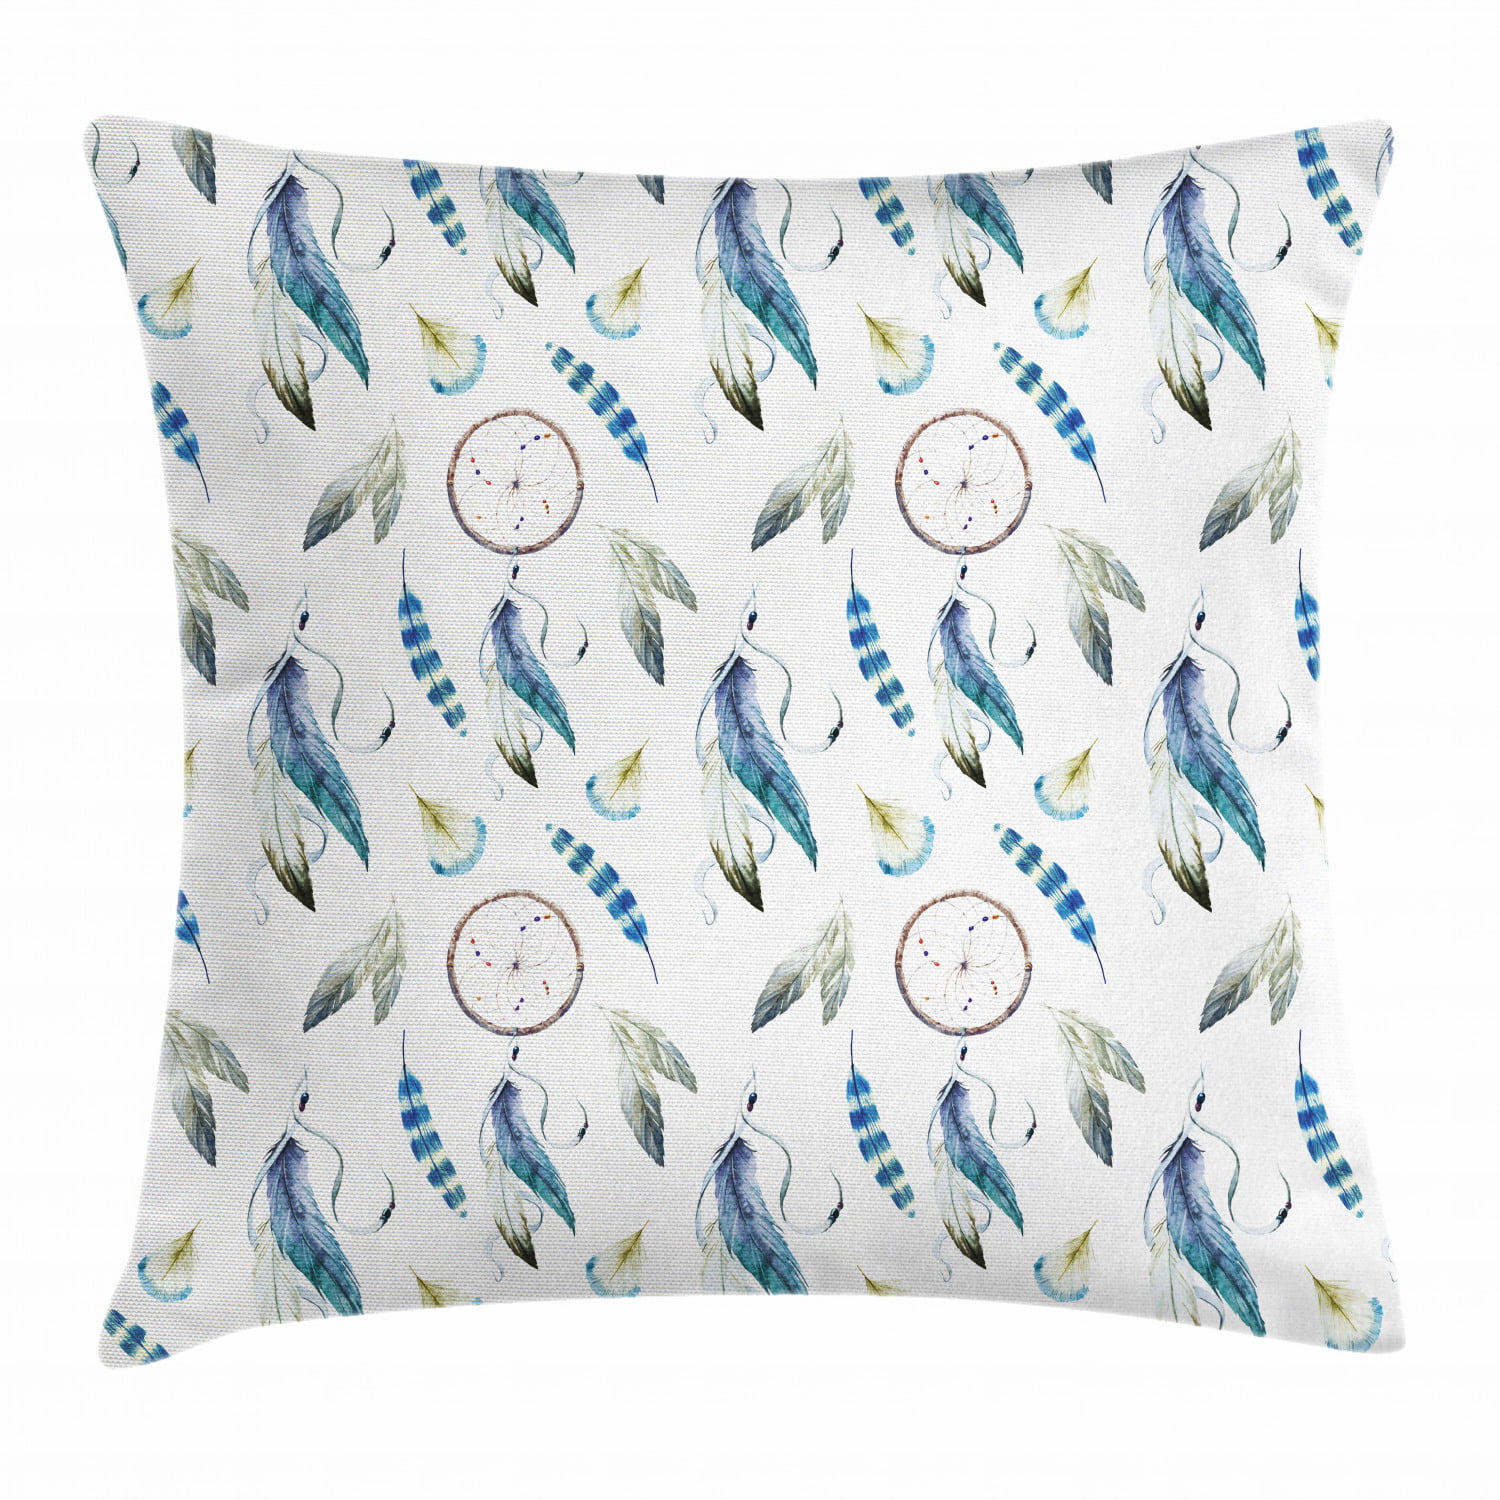 Dreamcatcher Tribal Feather Nursery Decorative Square Zippered PillowCovers